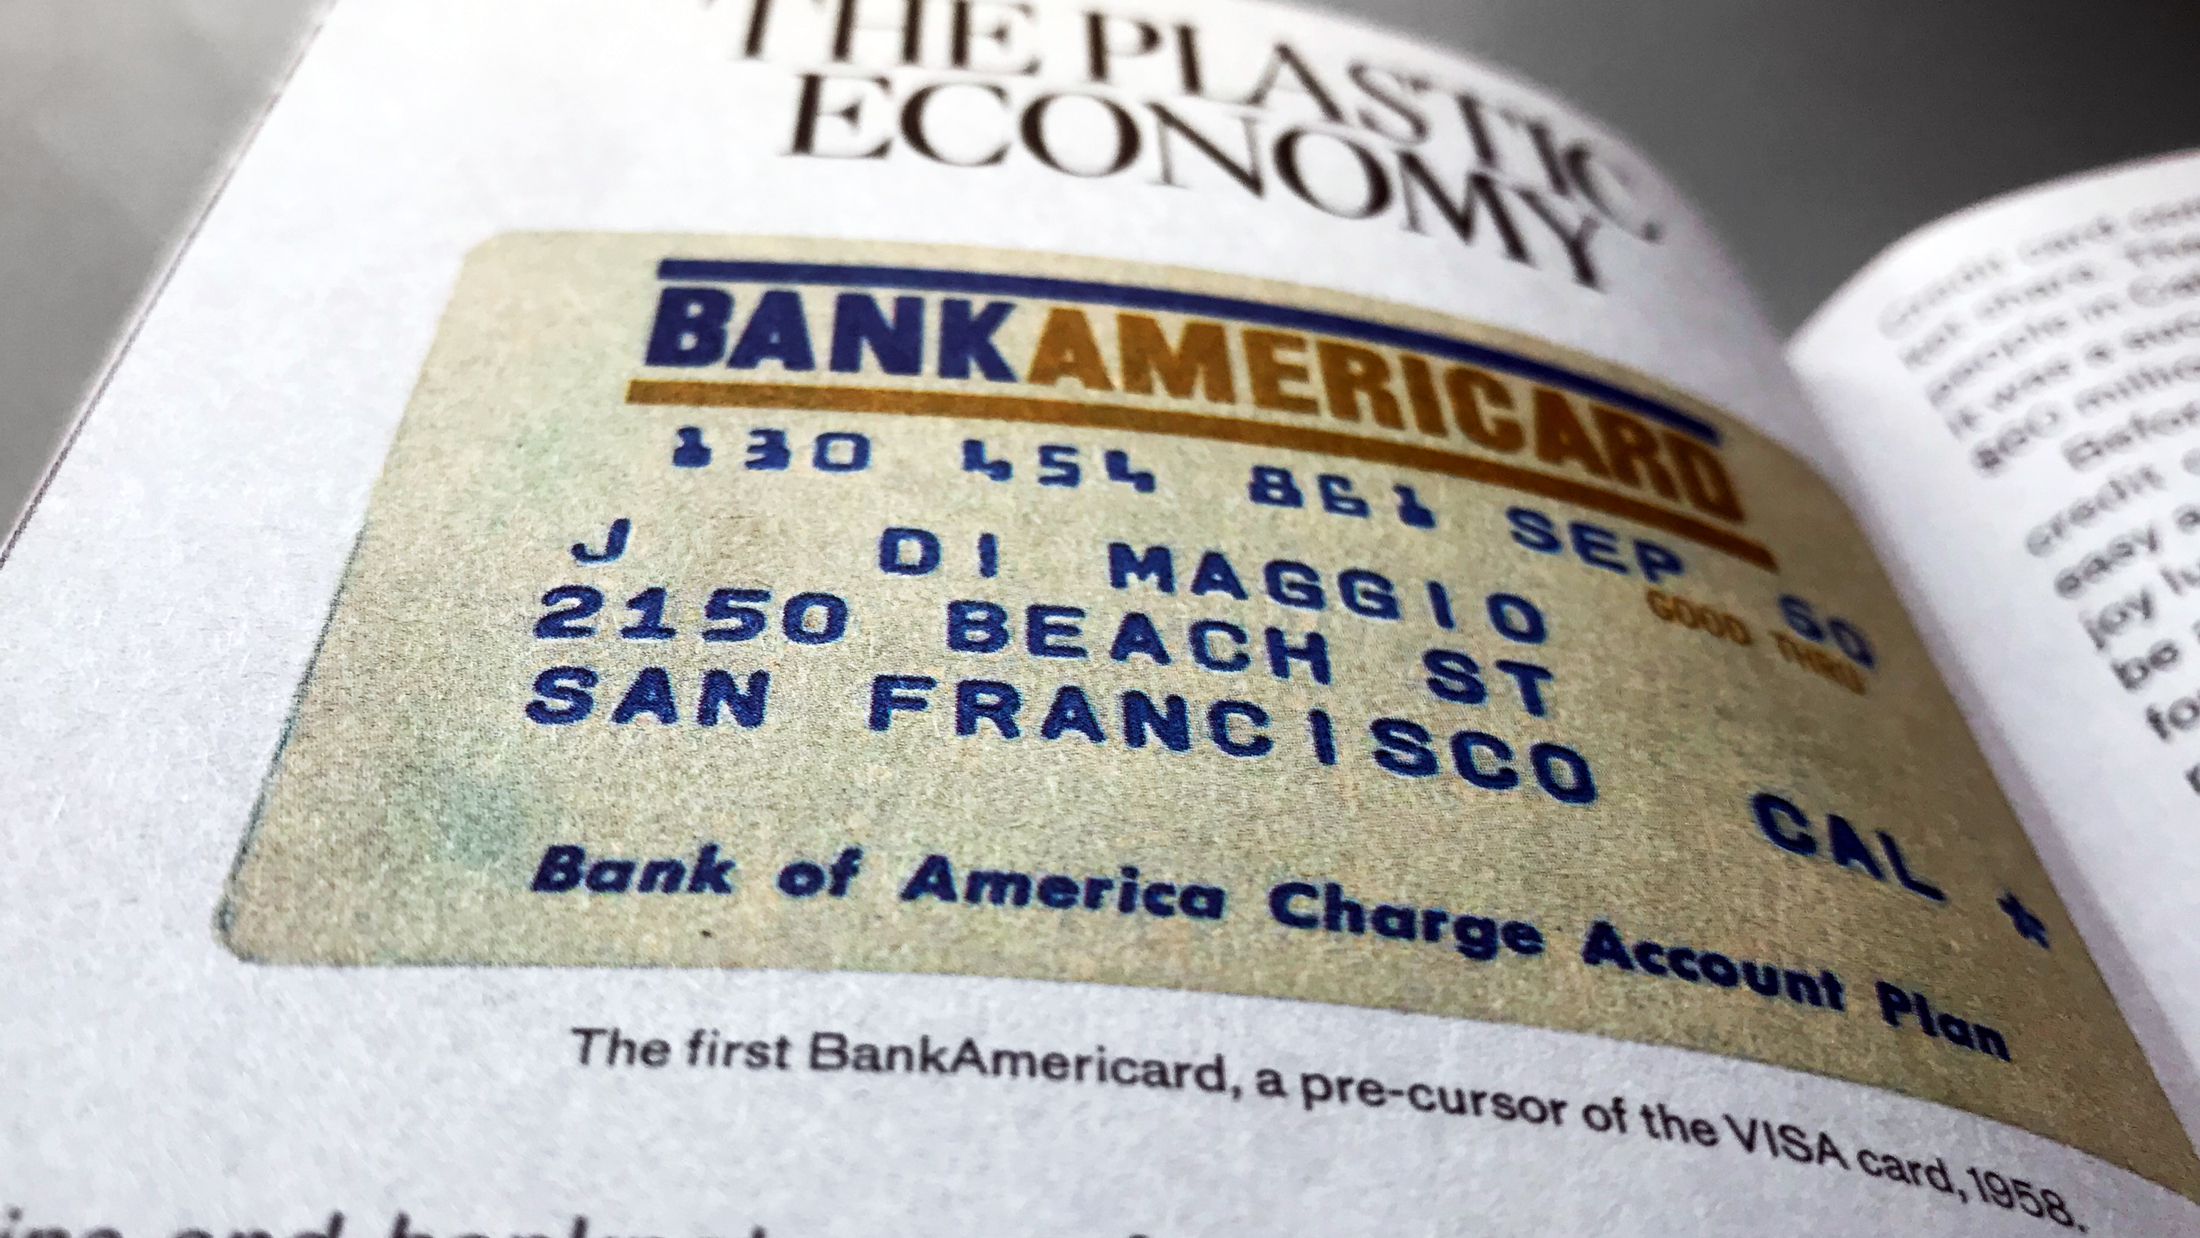 In THE PLASTIC ECONOMY section of CAPS LOCK we see a graphic-designer-assisted first general purpose credit card, issued by Bank of America in 1958 and with revolving credit that could be paid down incrementally instead of paying the balance at the end of each month.